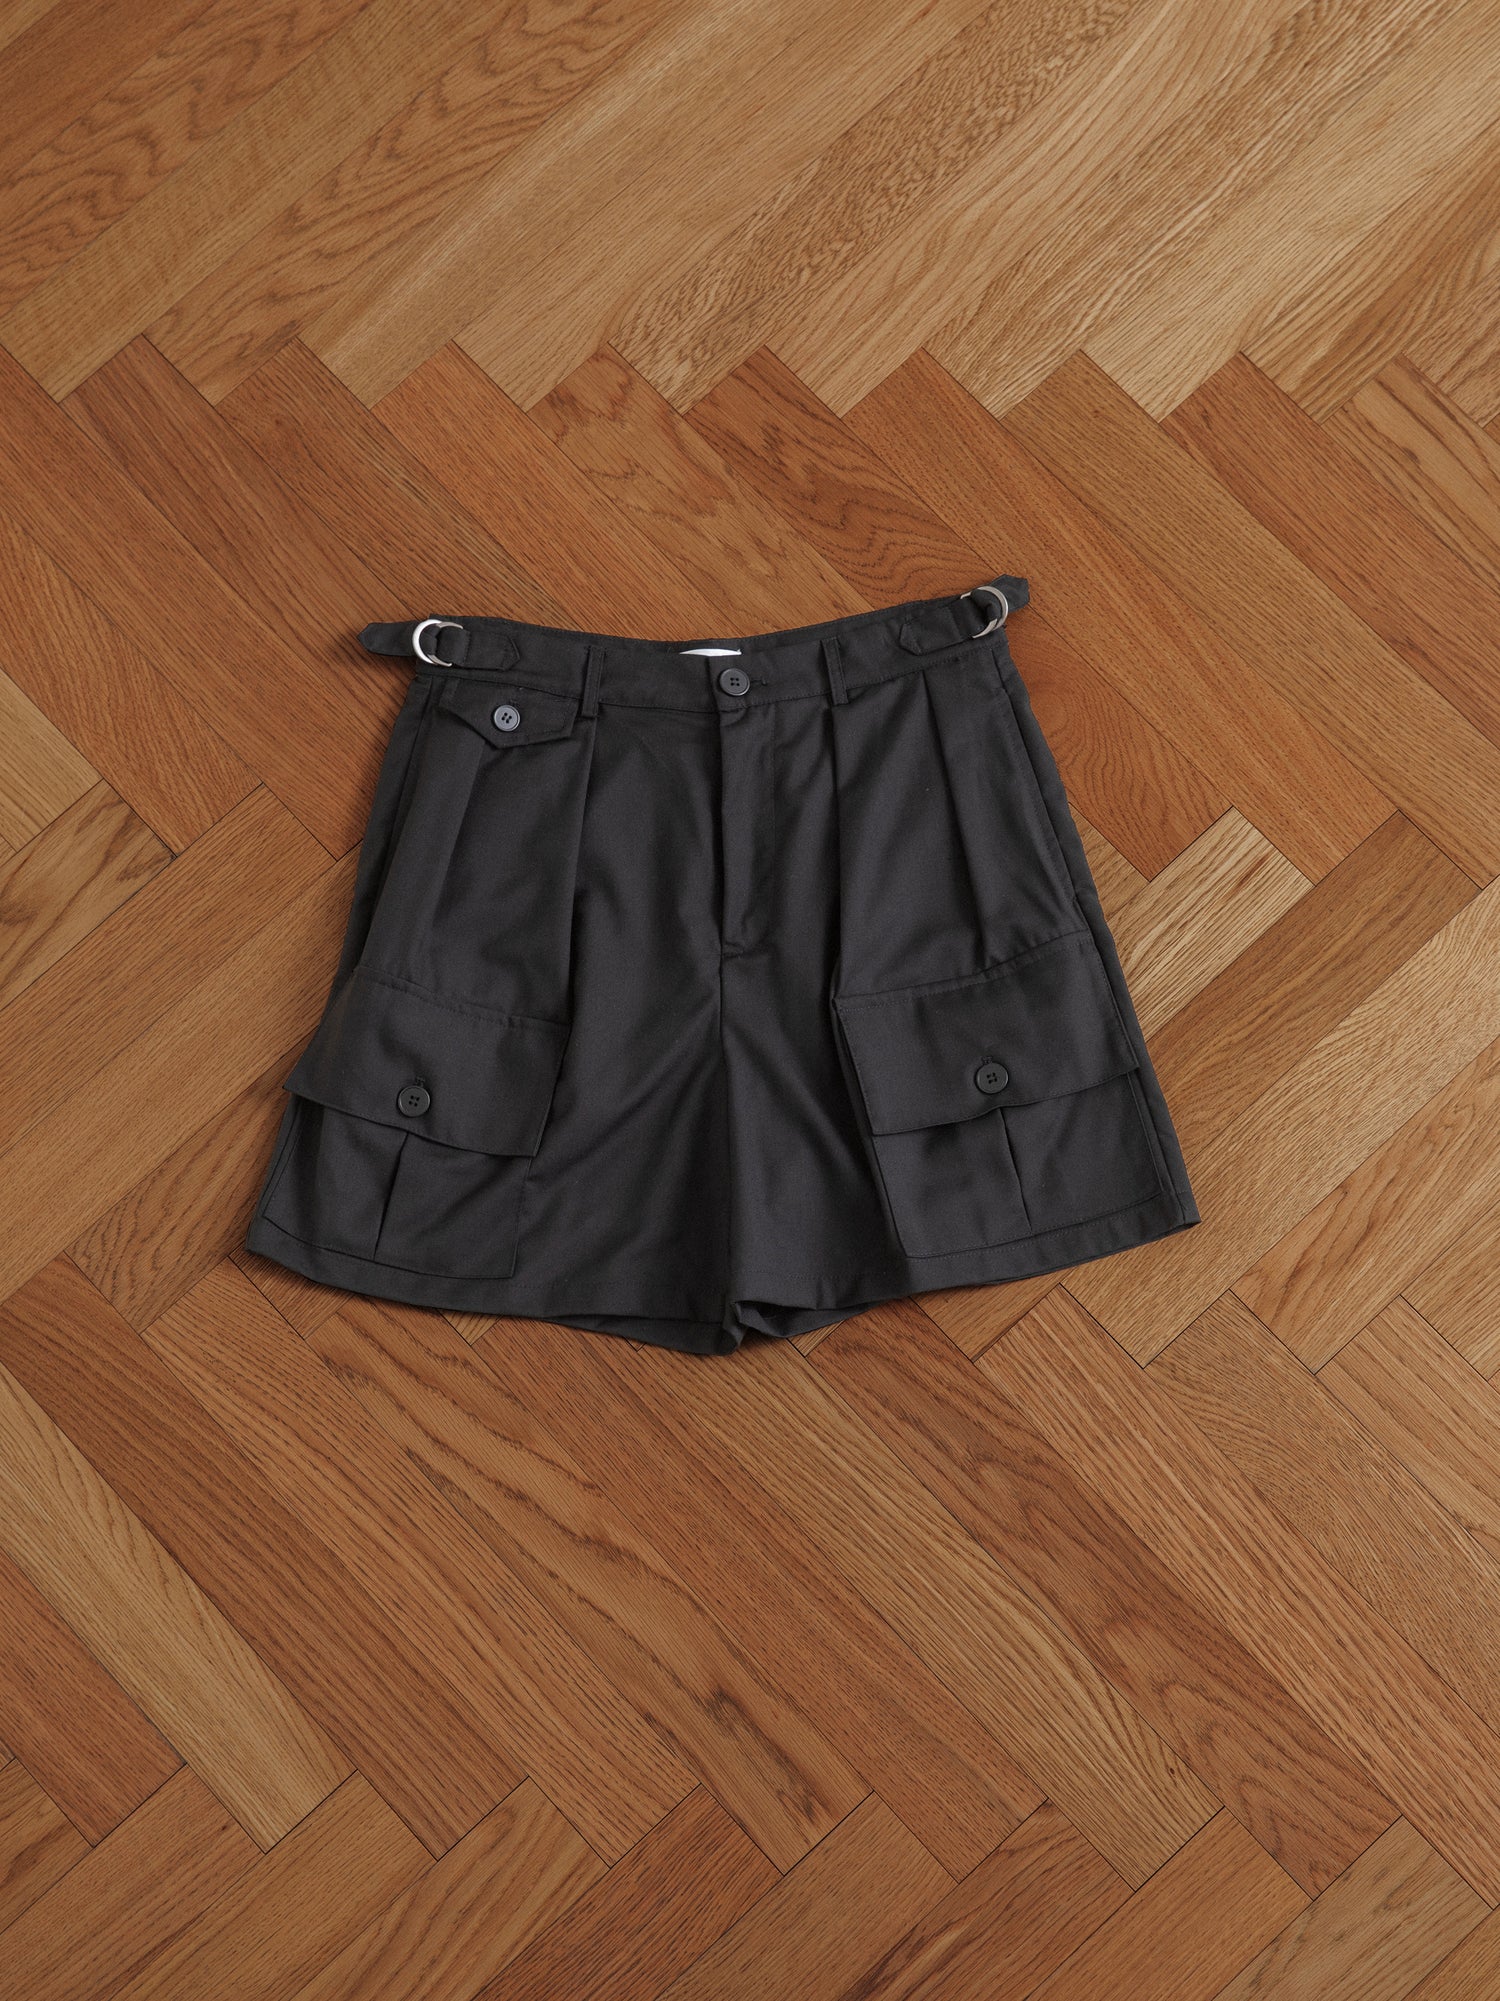 A pair of elegant Found pleated pocket cargo shorts on a wooden floor.